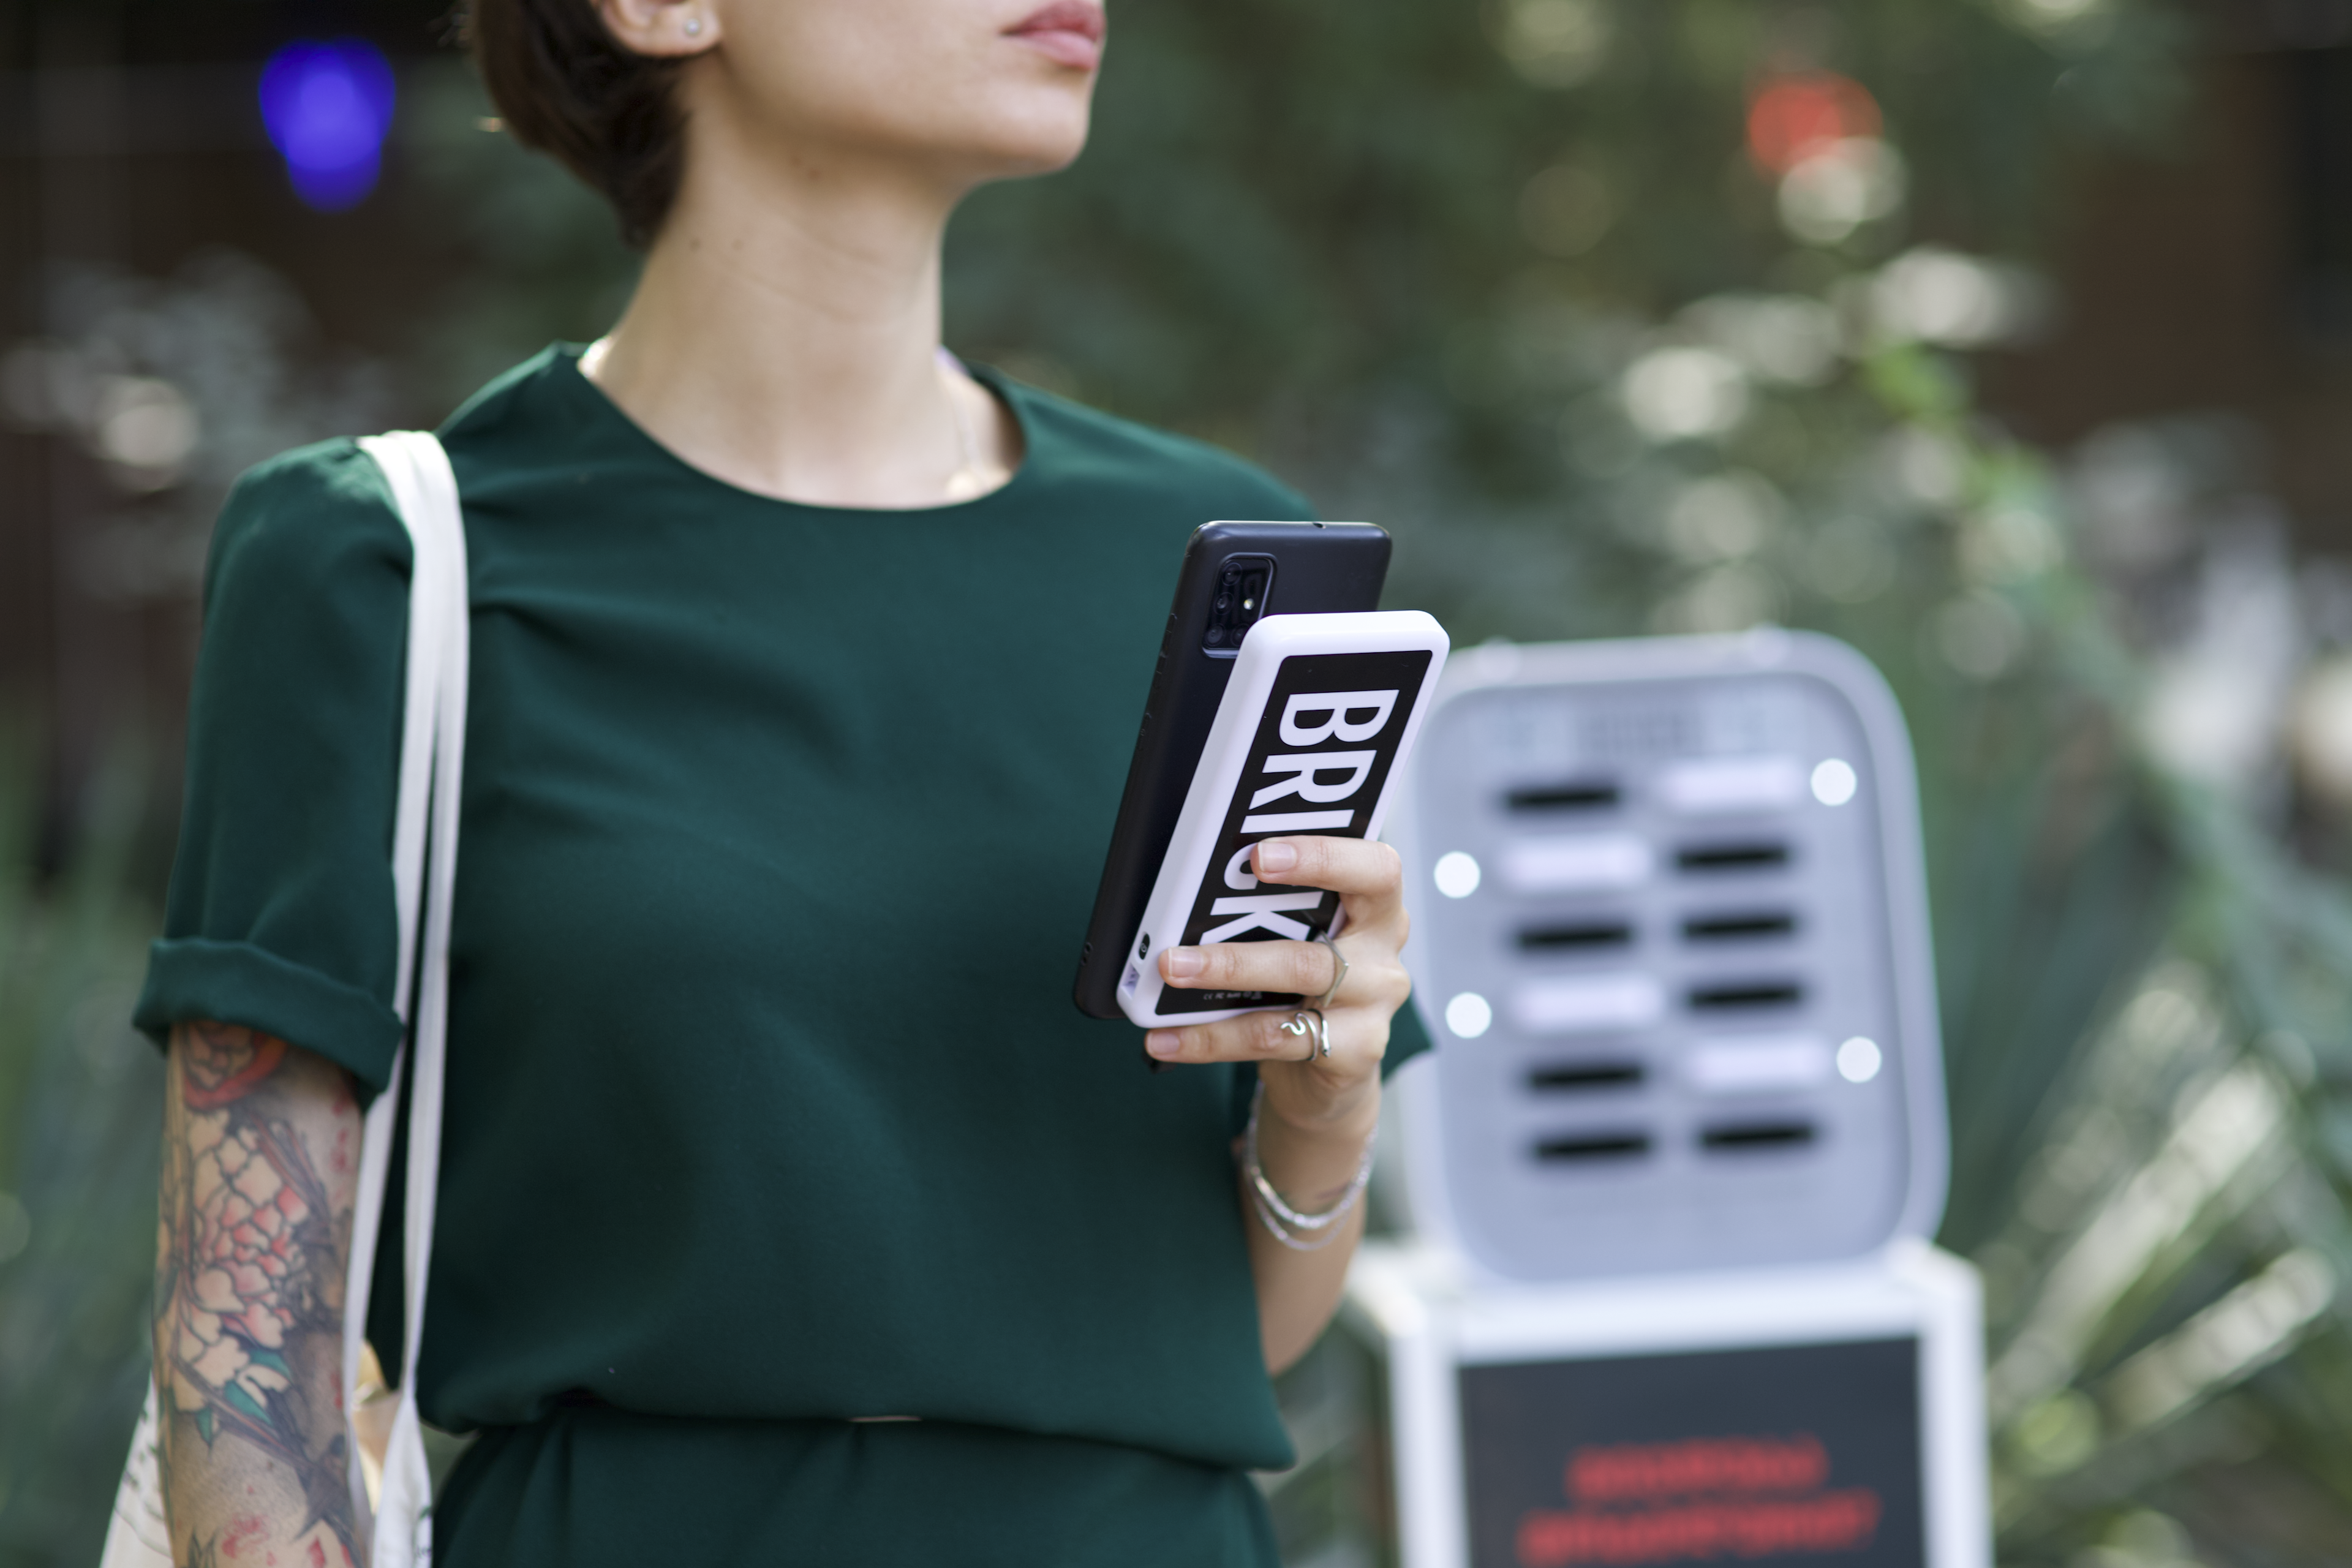 A woman holding a Brick power bank in front of a station